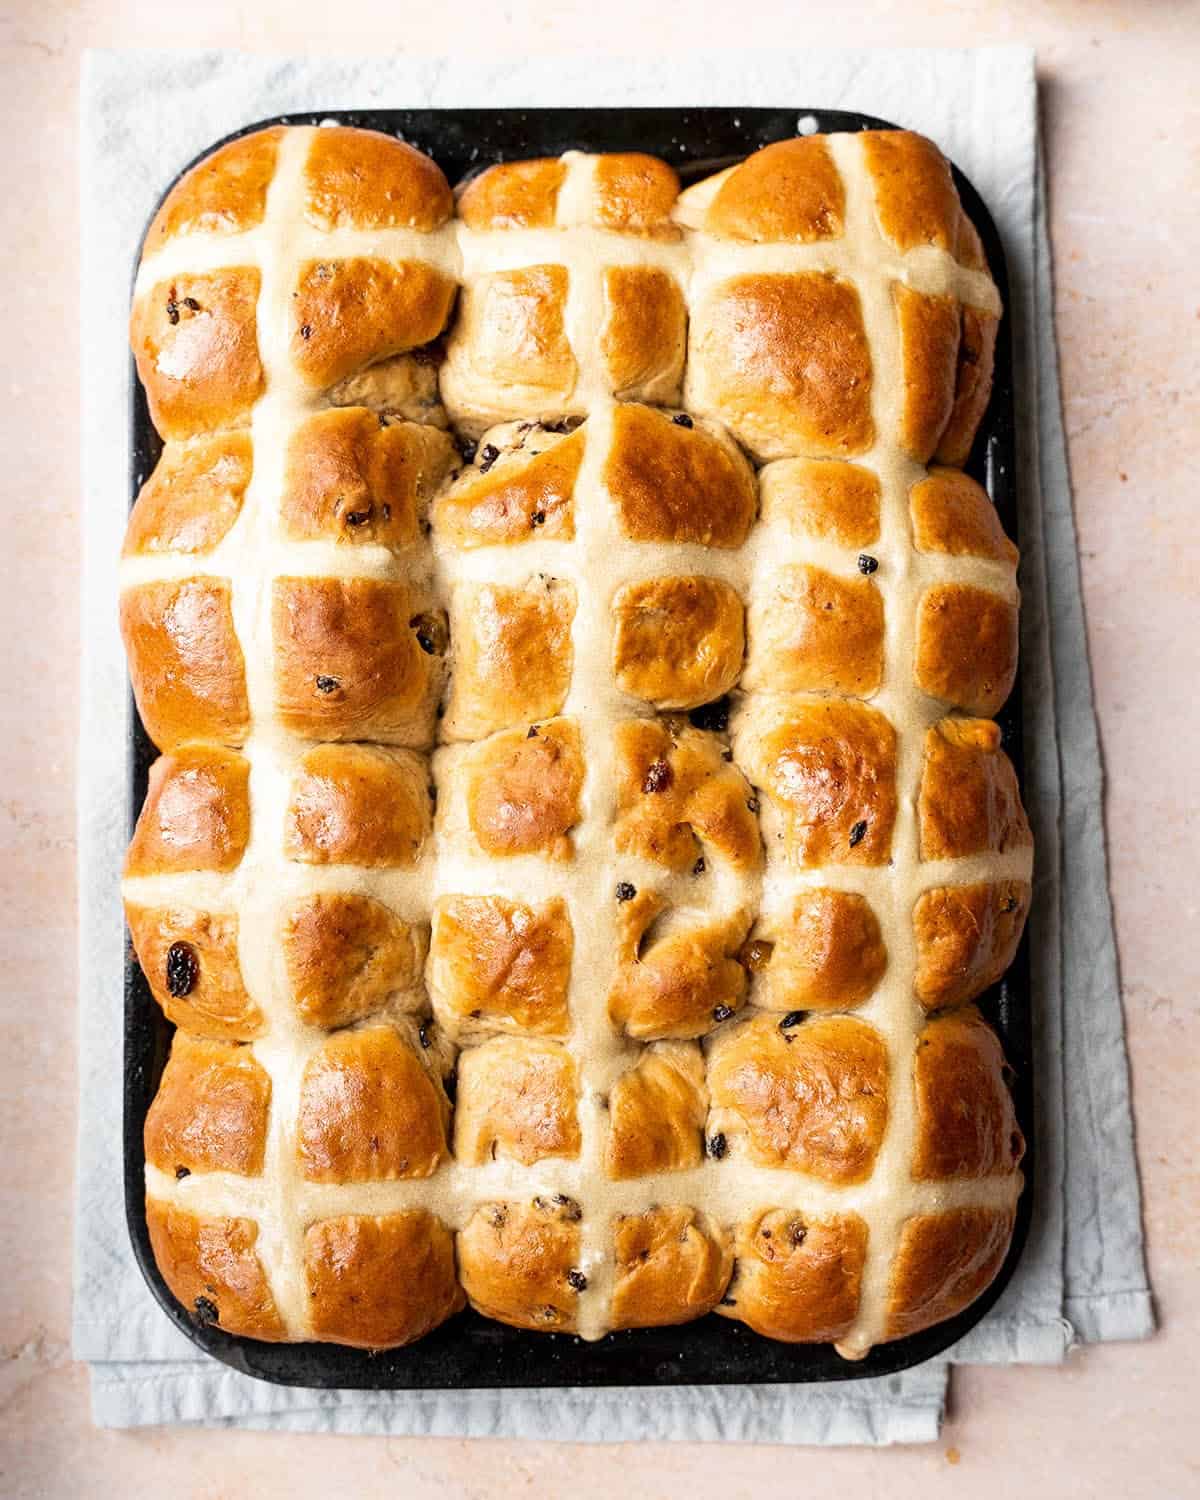 Full tray of vegan hot cross buns fresh out of the oven on a marble surface.